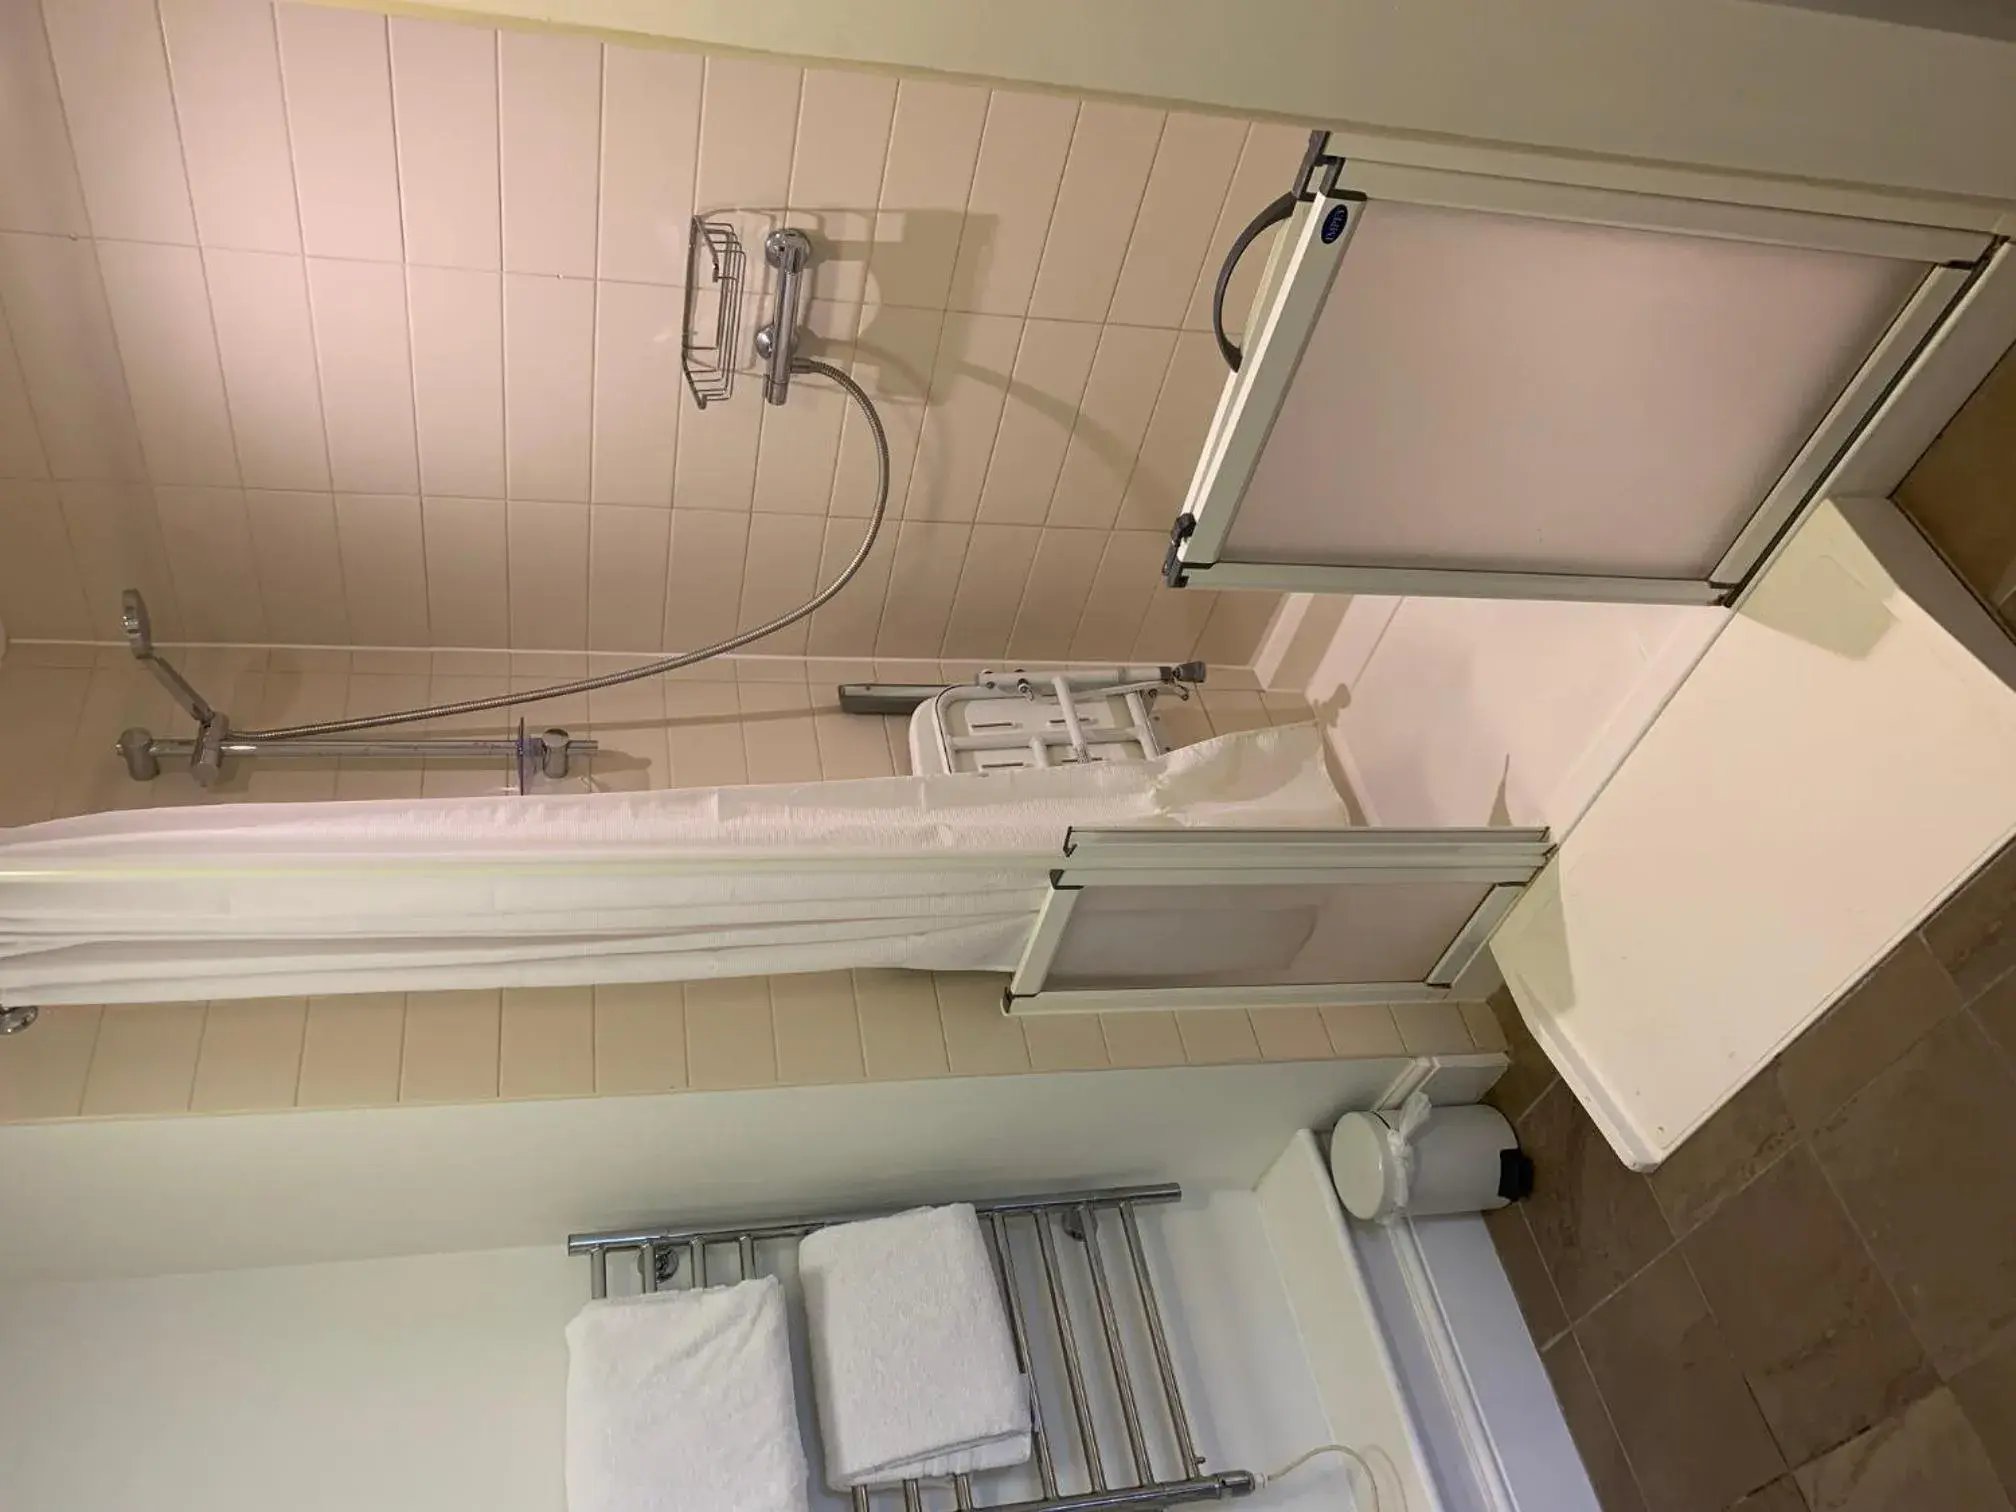 Facility for disabled guests, Bathroom in Kings Arms Hotel